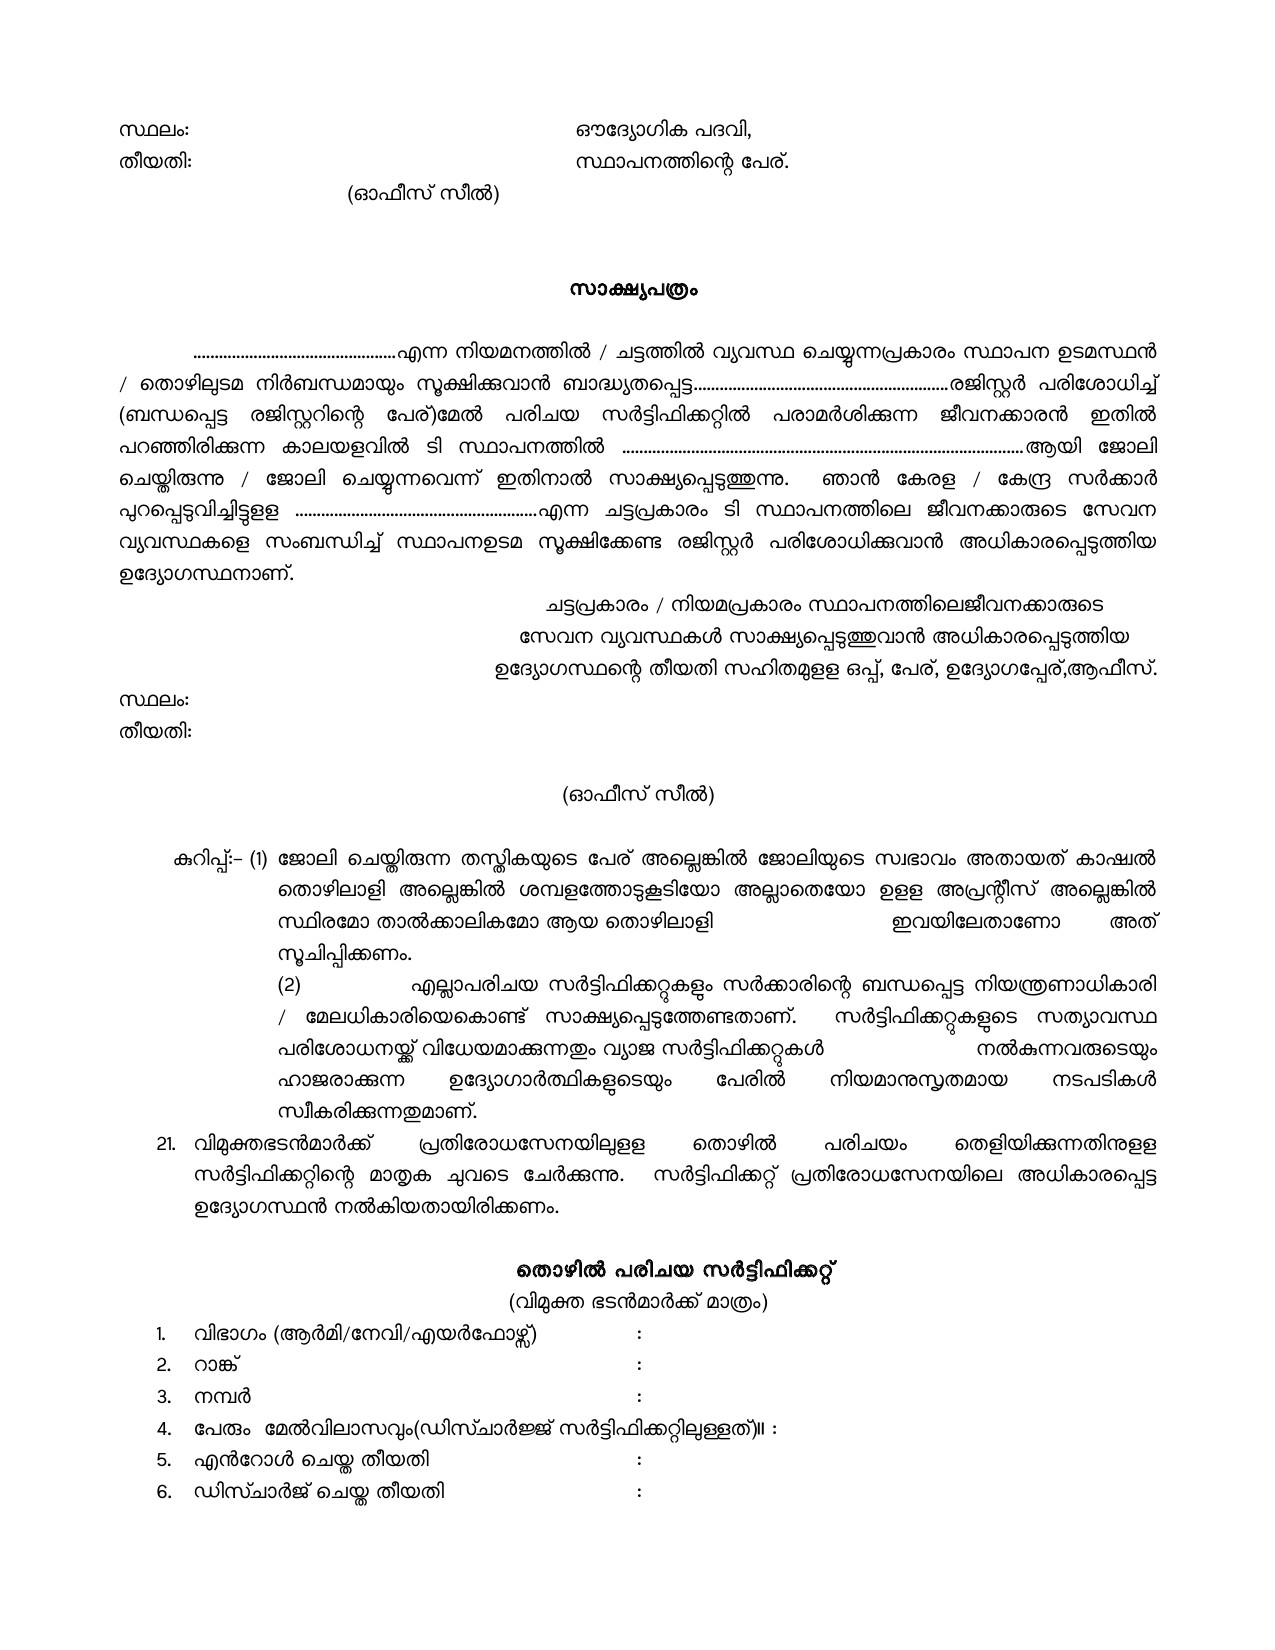 General Conditions and Certificate Formats in Malayalam - Notification Image 23